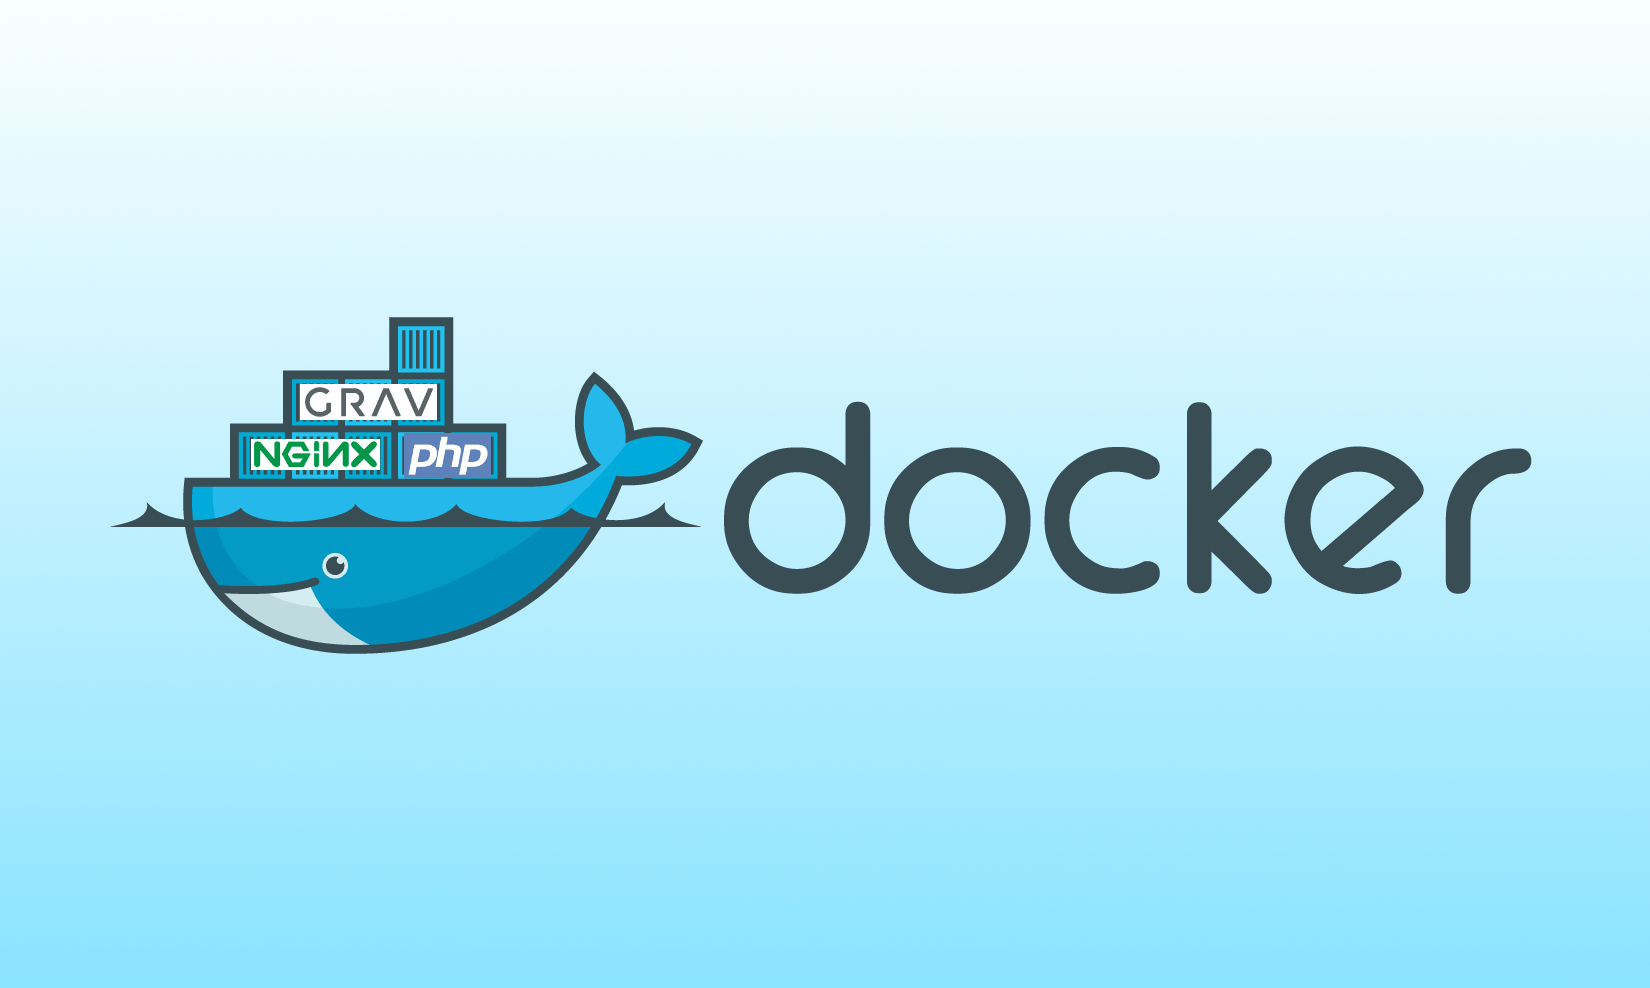 Grav-PHP-Nginx with Docker cover image